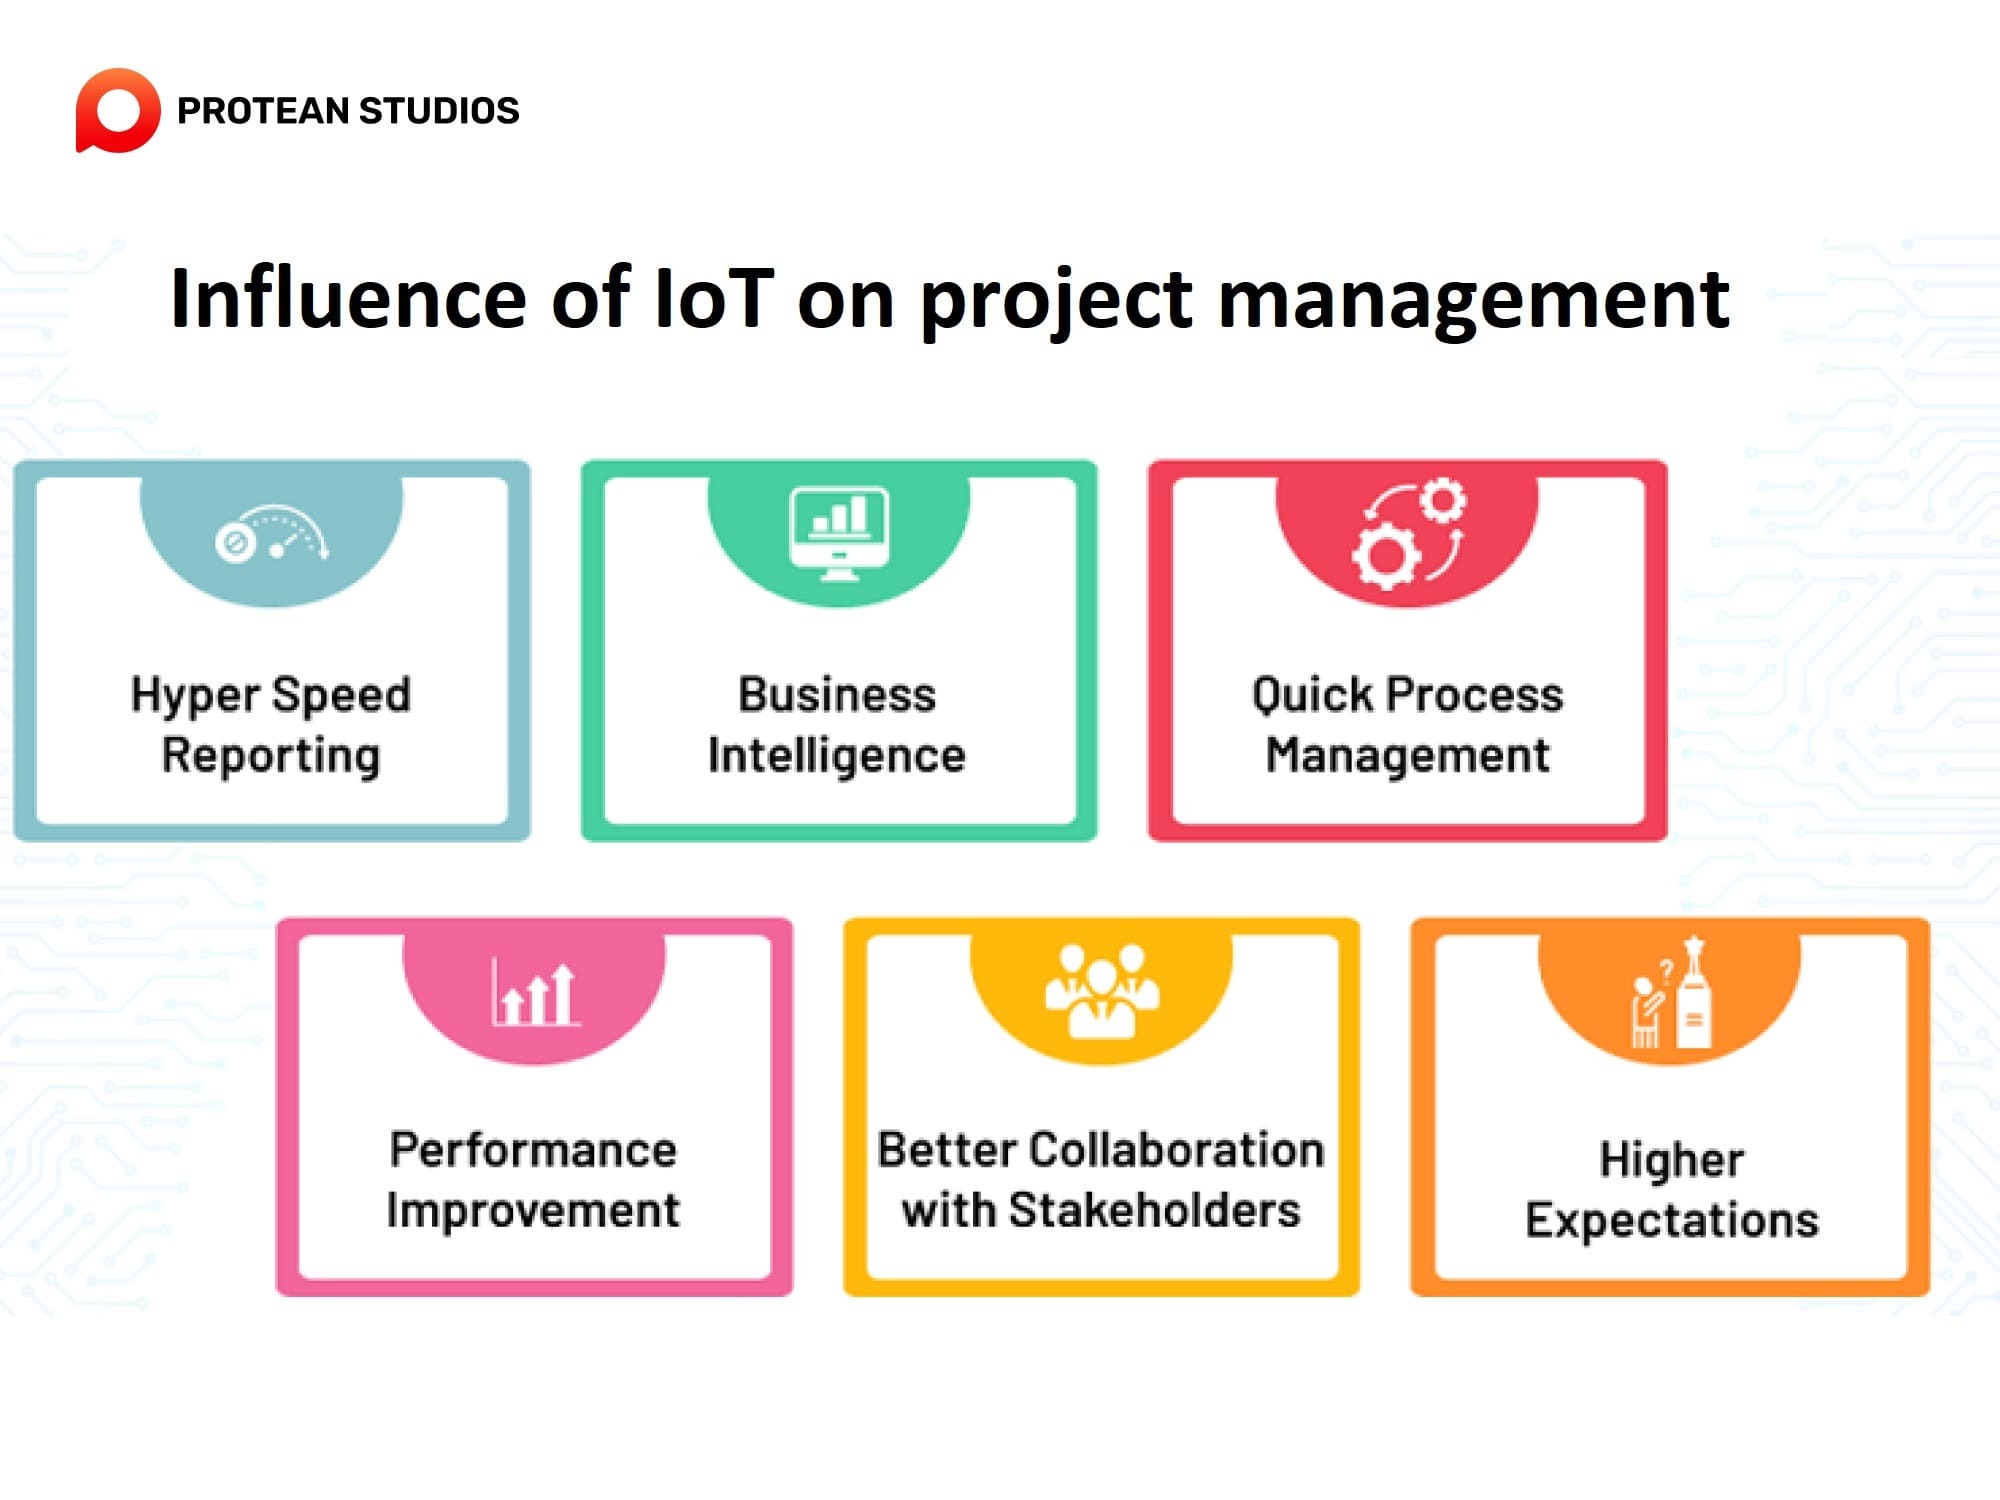 IoT in project management helps streamline processes